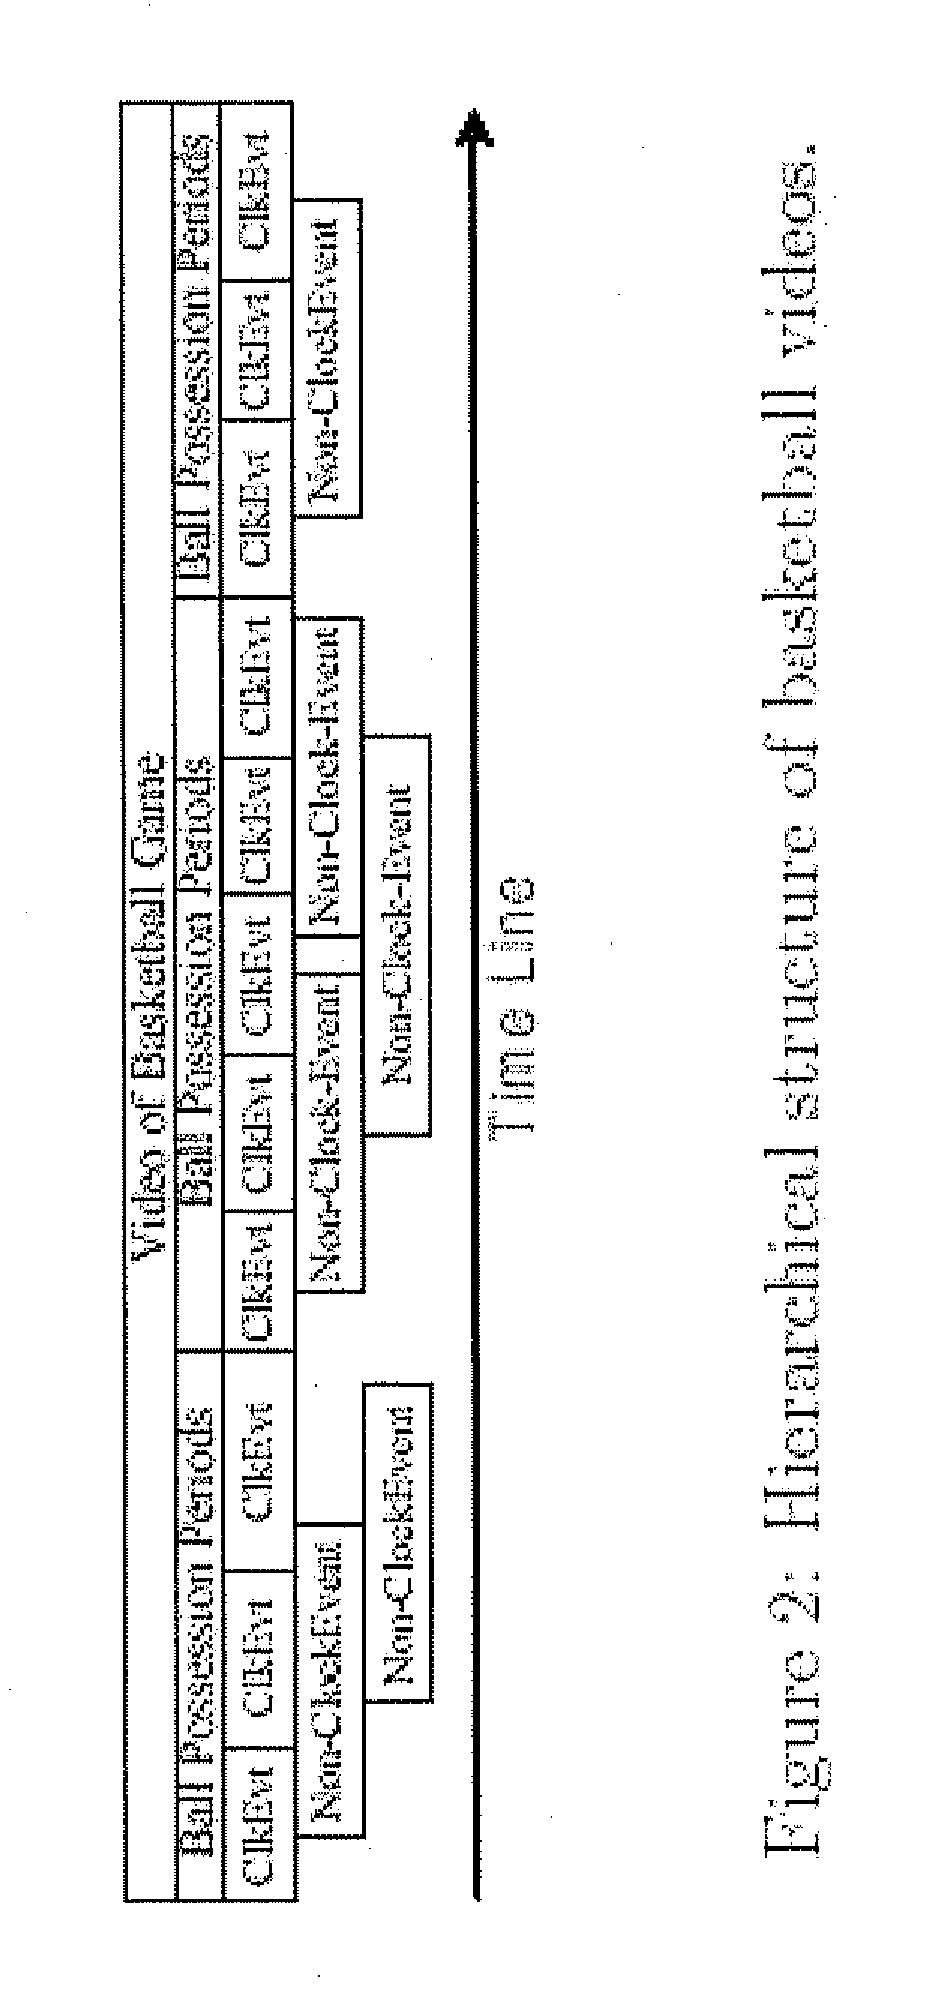 Systems and methods for the autonomous production of videos from multi-sensored data